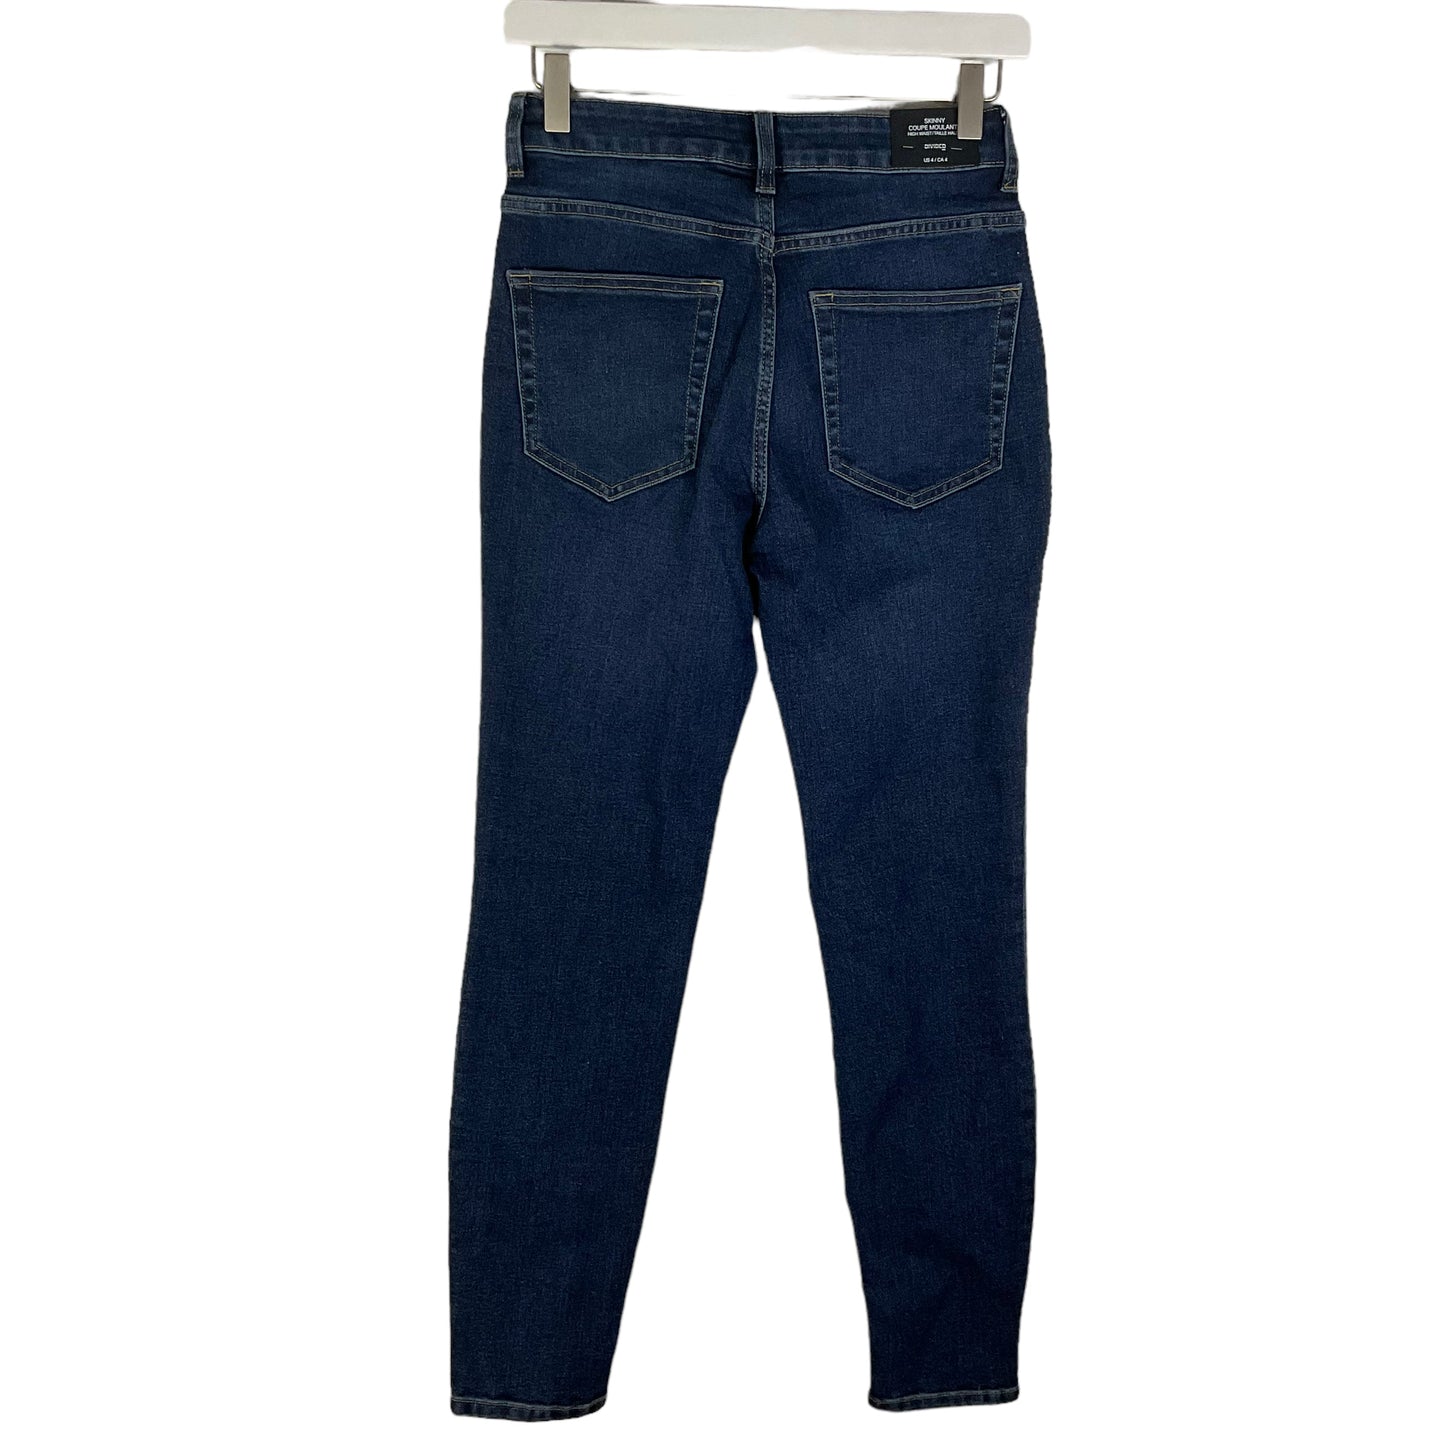 Jeans Skinny By Divided  Size: 4